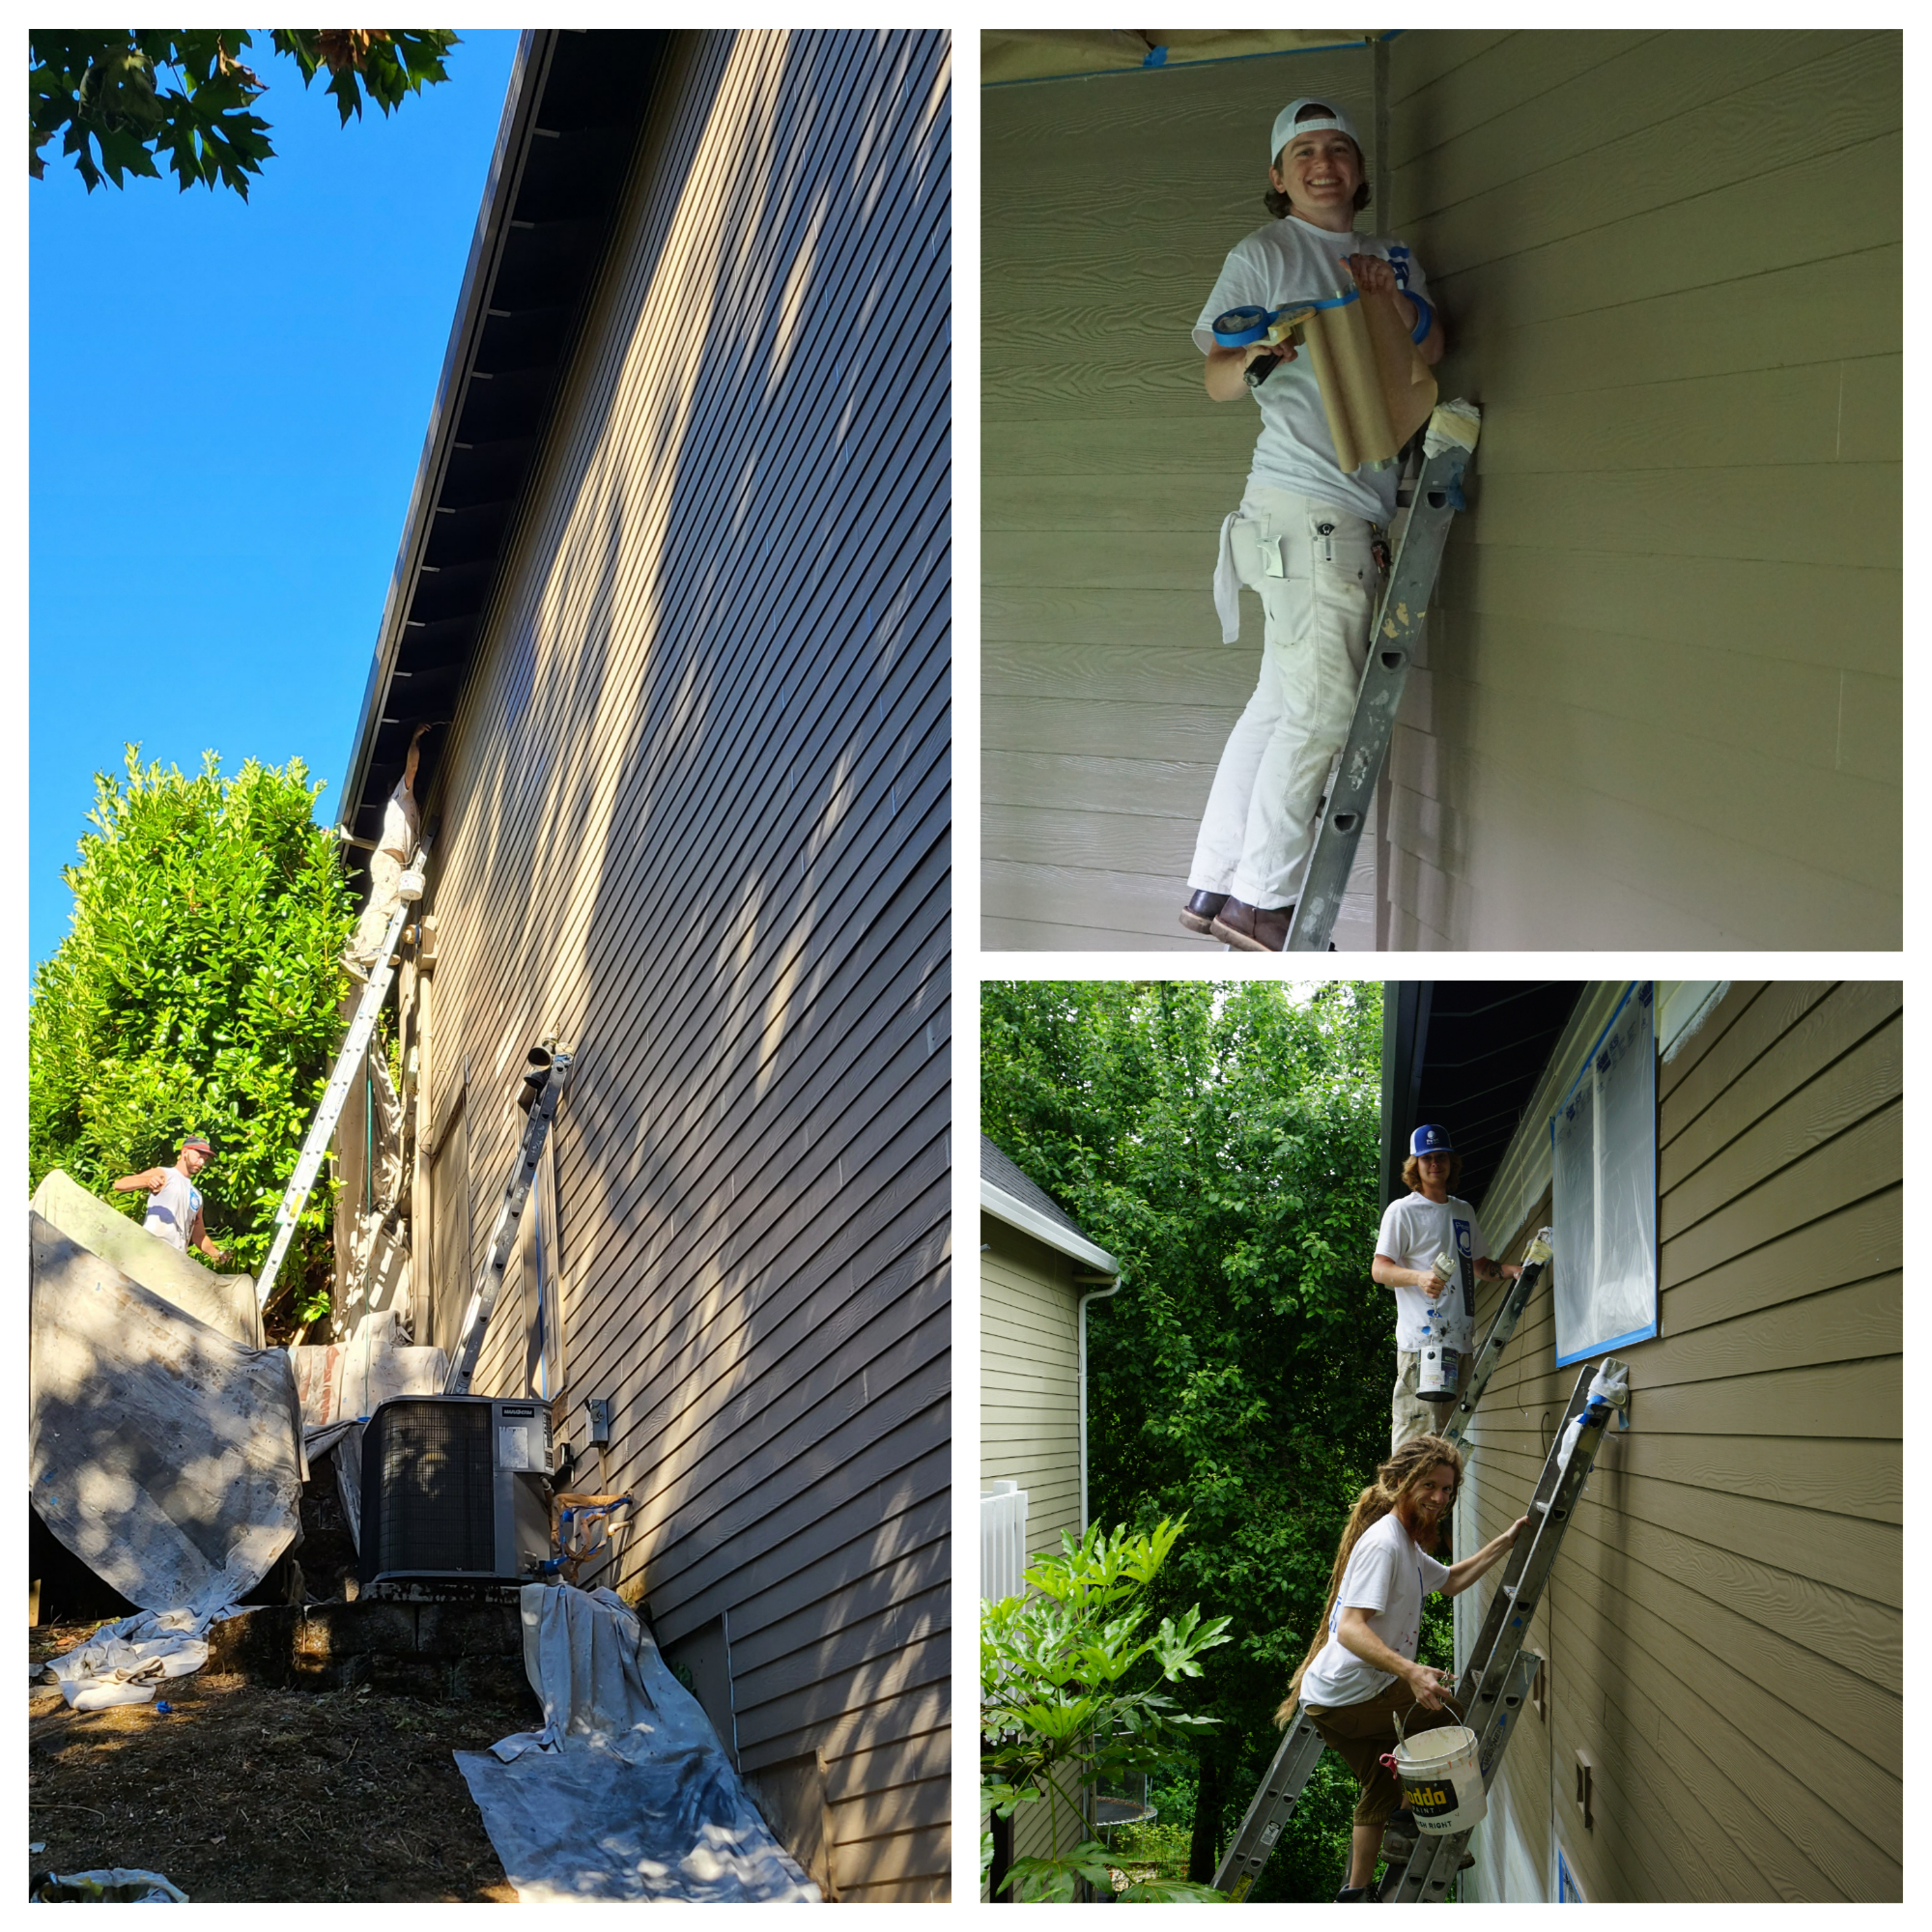 Four men from Tigard are painting the exterior of a house, enhancing its curb appeal on Bull Mountain.